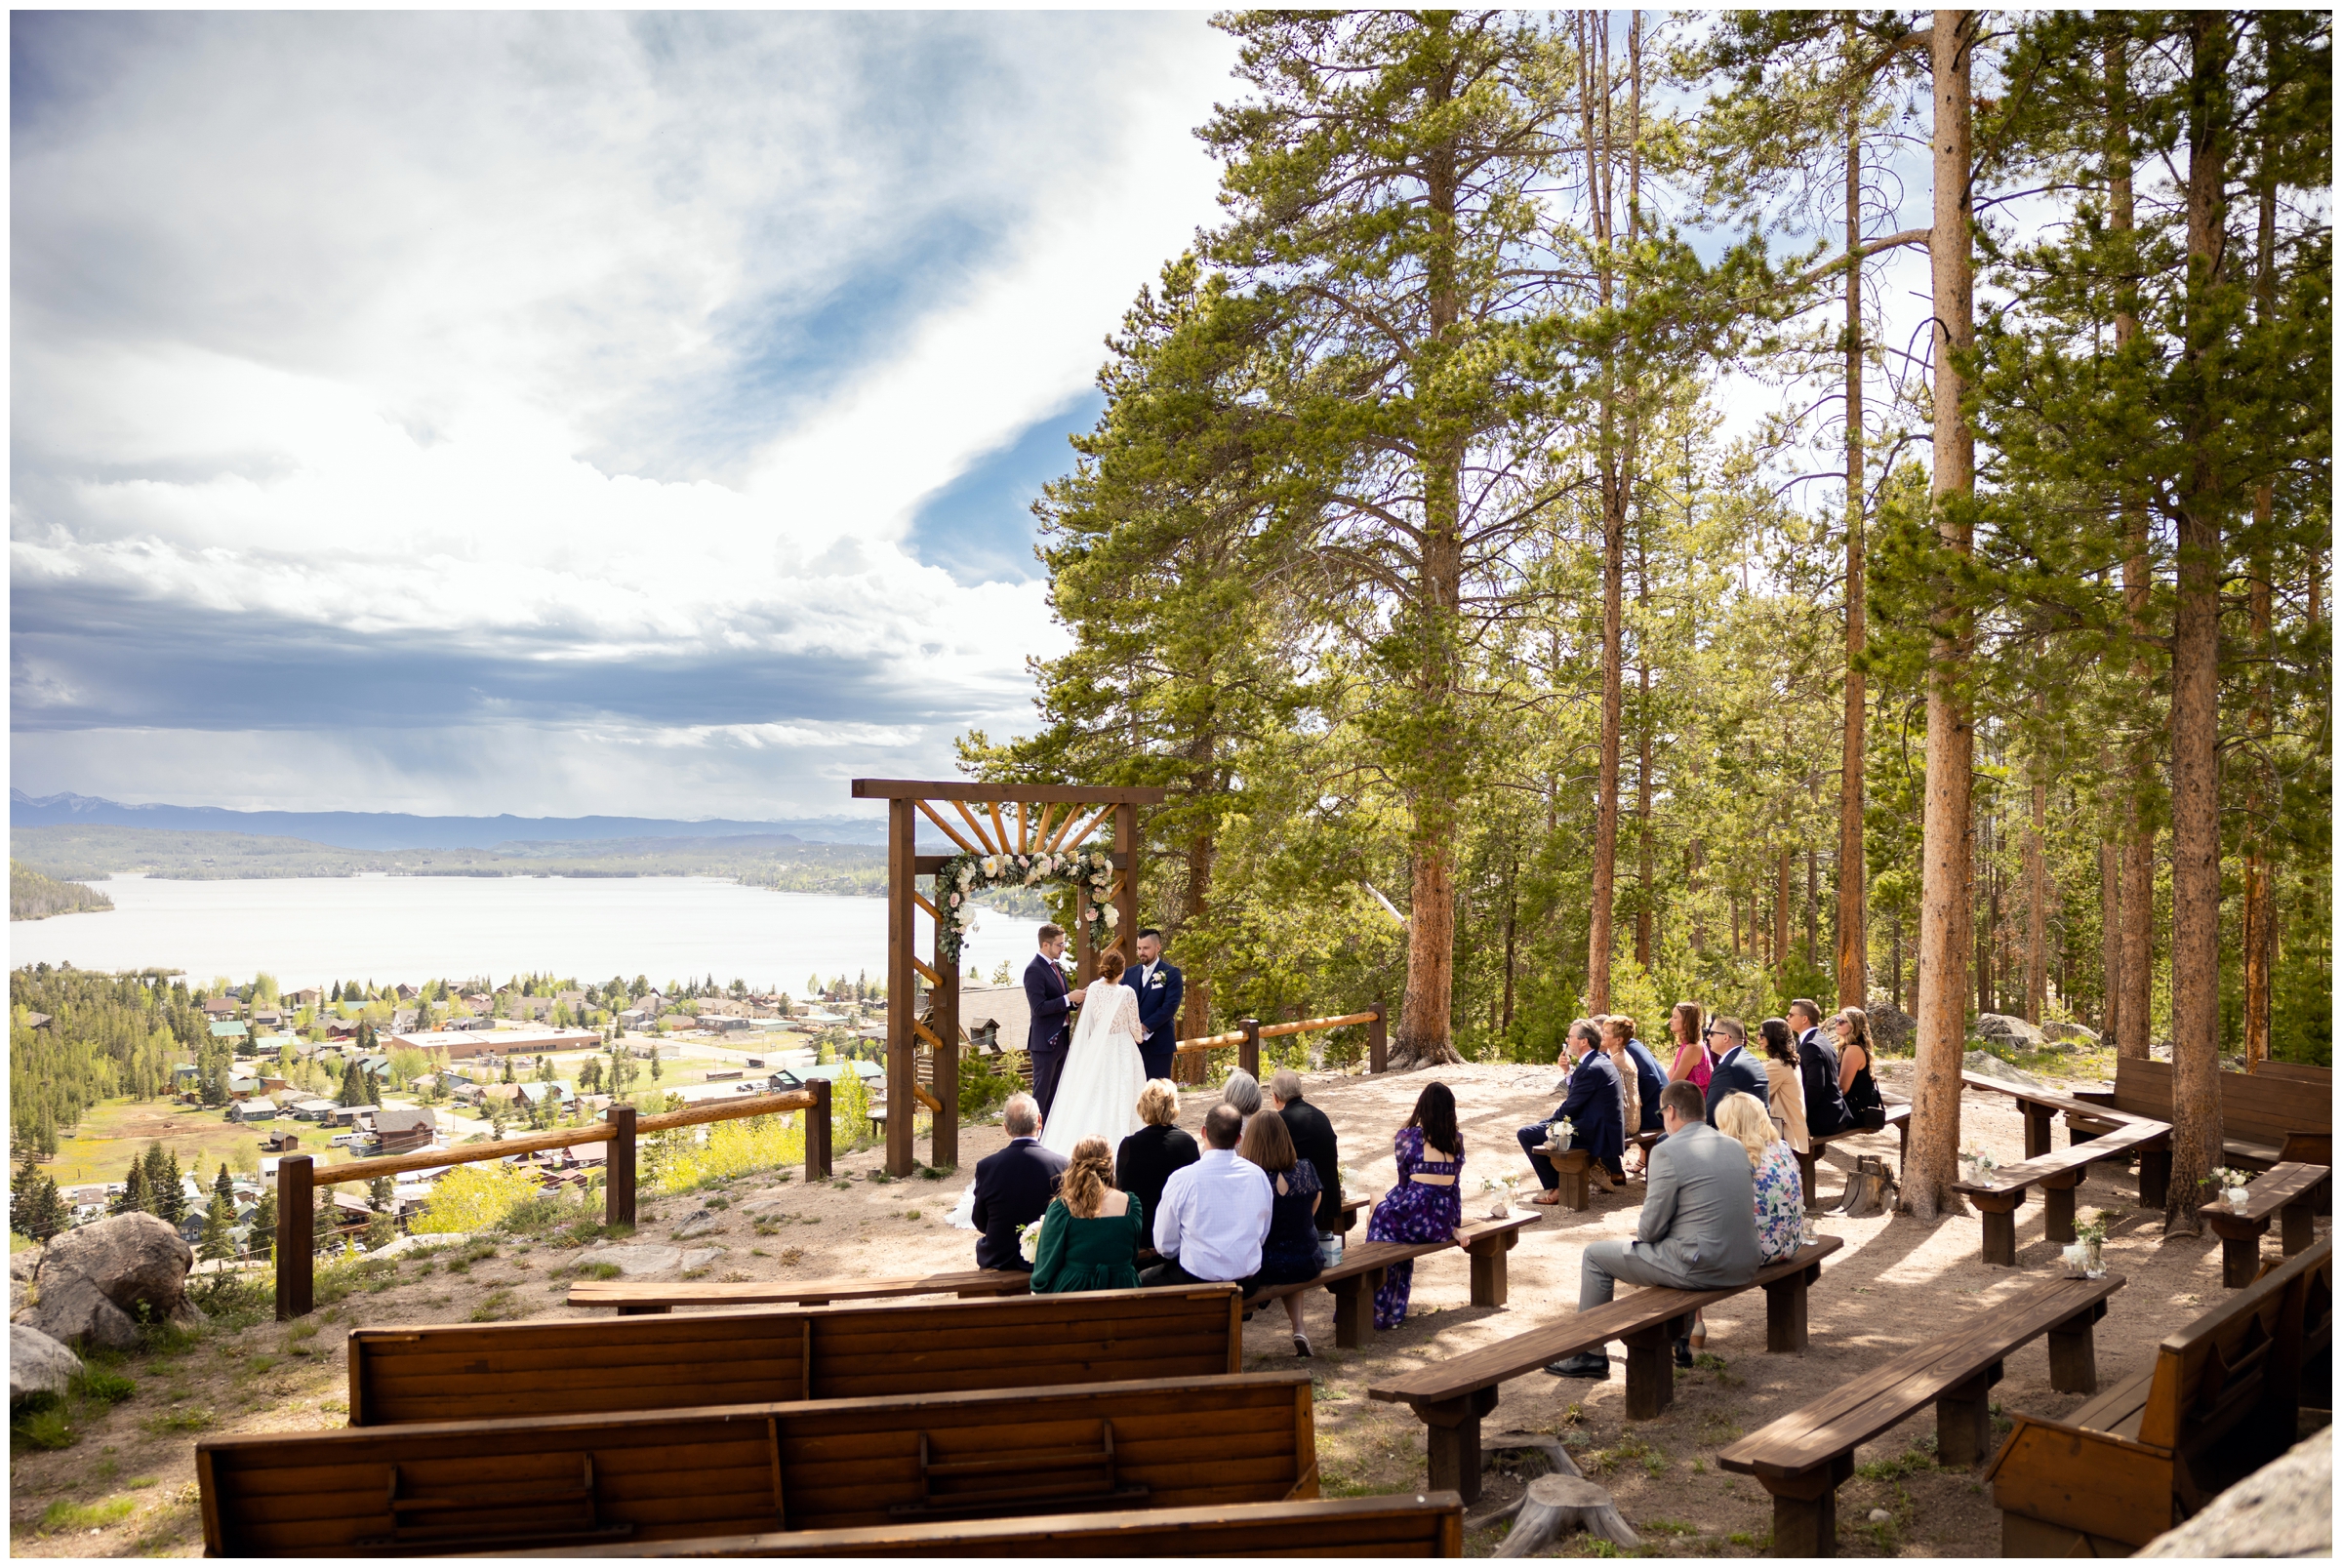 outdoor wedding ceremony overlooking lake at Grand Lake lodge wedding in Colorado 